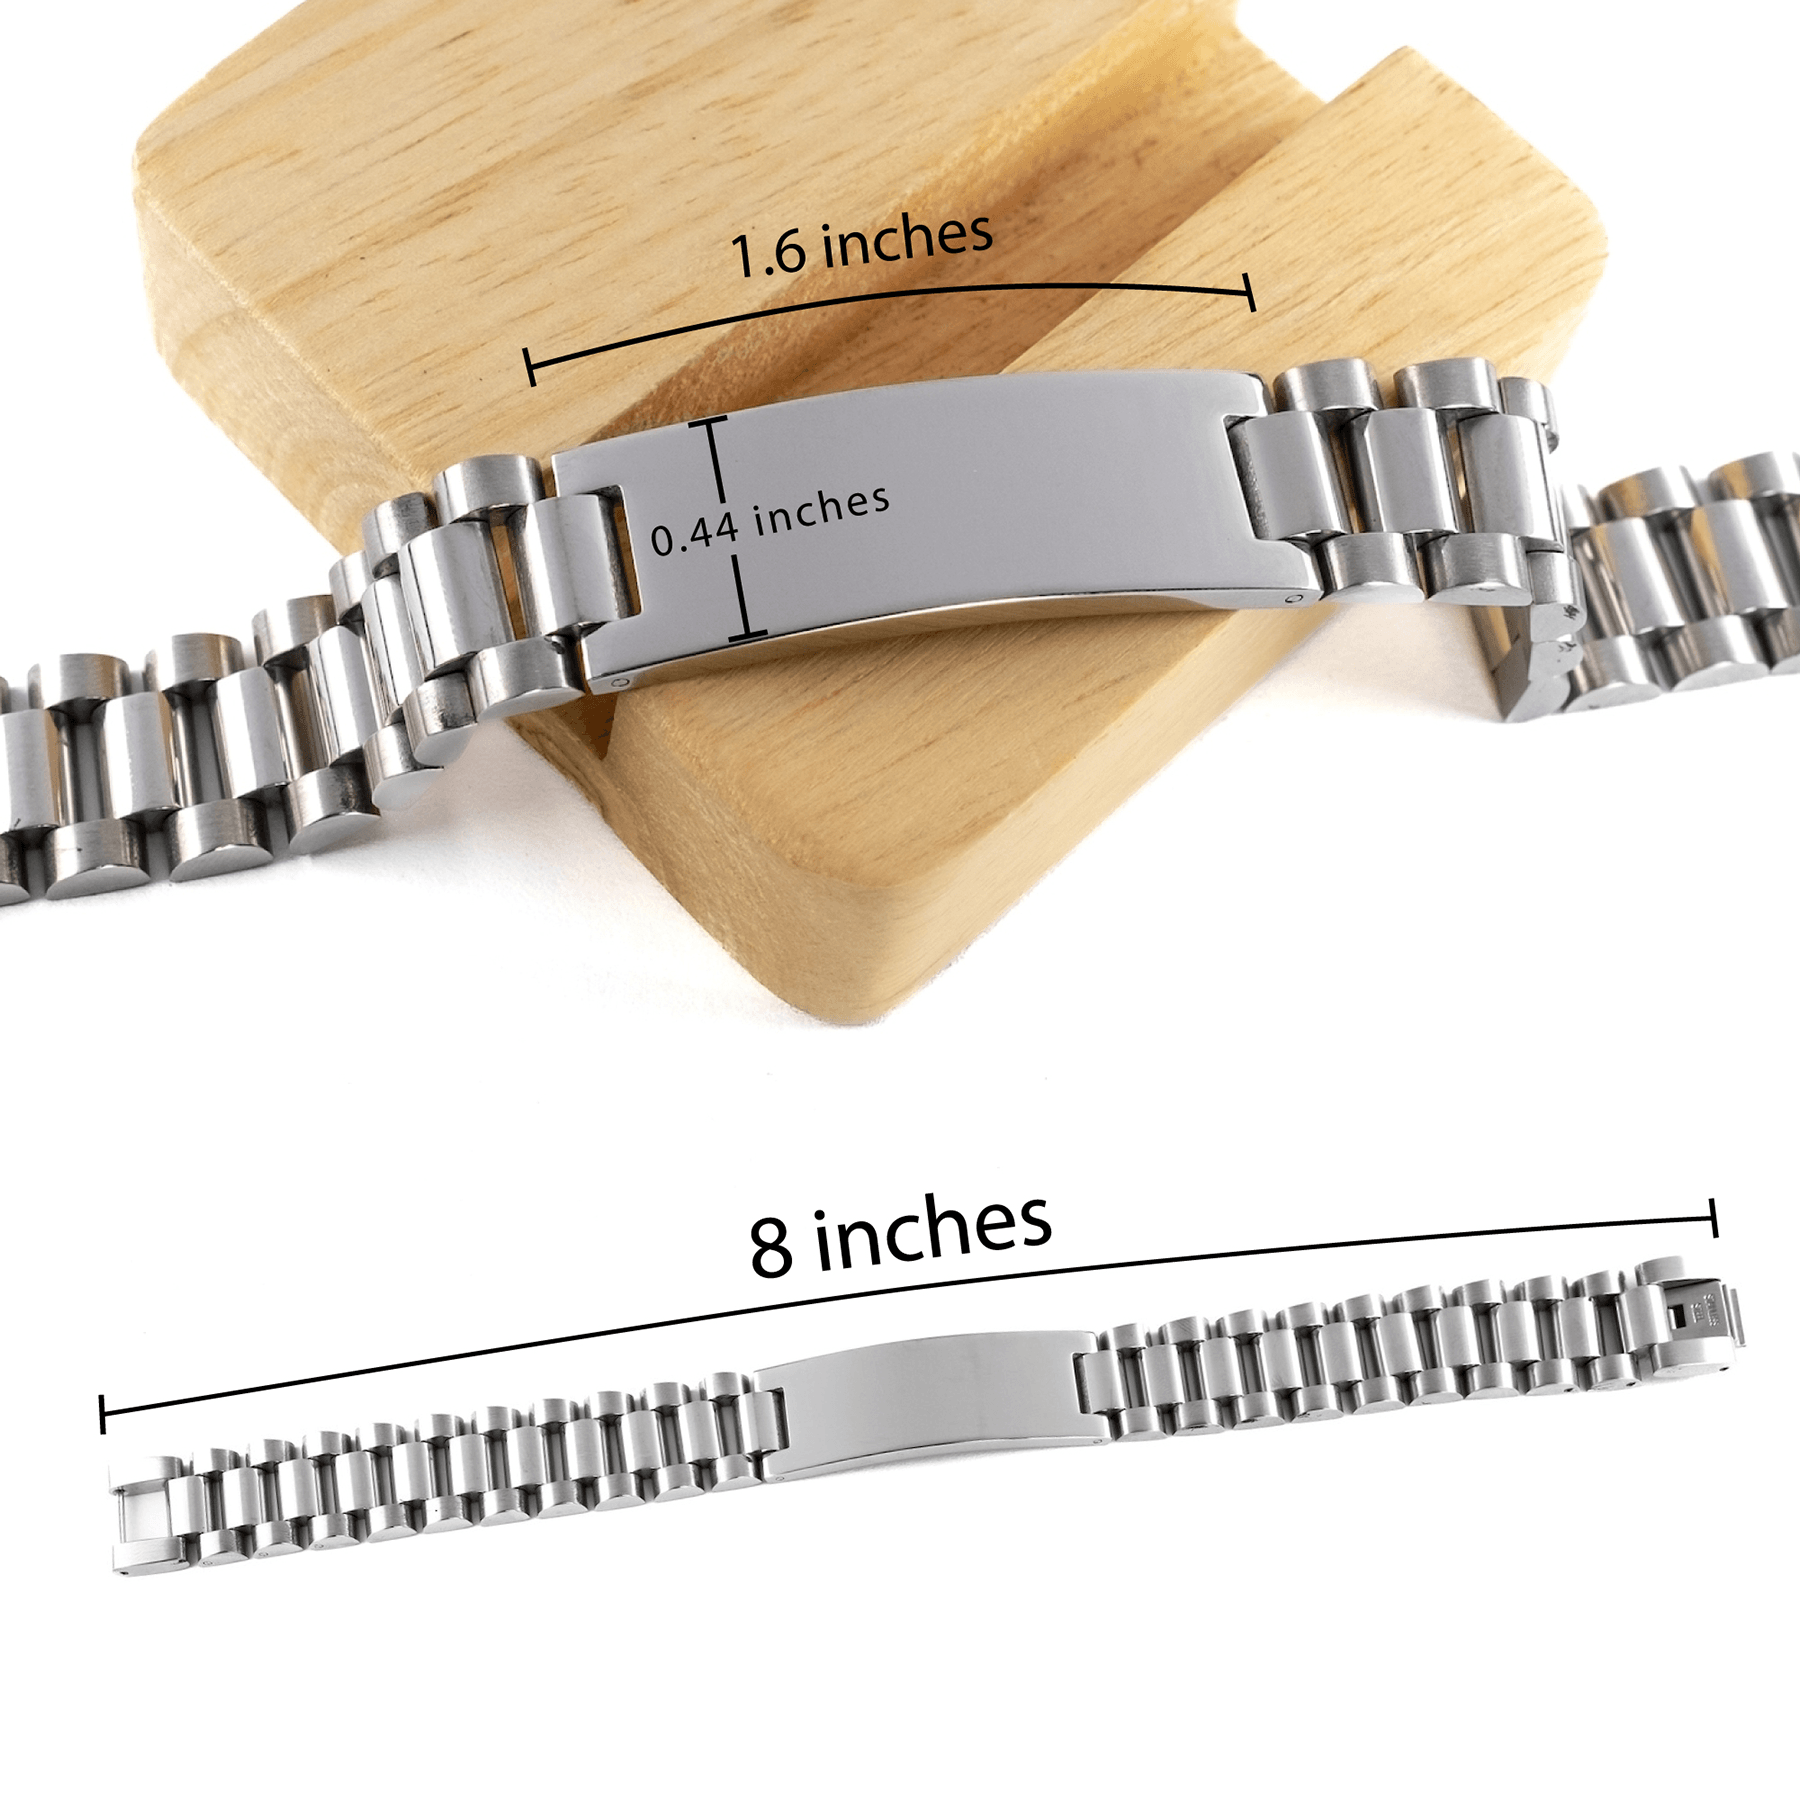 Remarkable Microbiologist Gifts, Your dedication and hard work, Inspirational Birthday Christmas Unique Ladder Stainless Steel Bracelet For Microbiologist, Coworkers, Men, Women, Friends - Mallard Moon Gift Shop